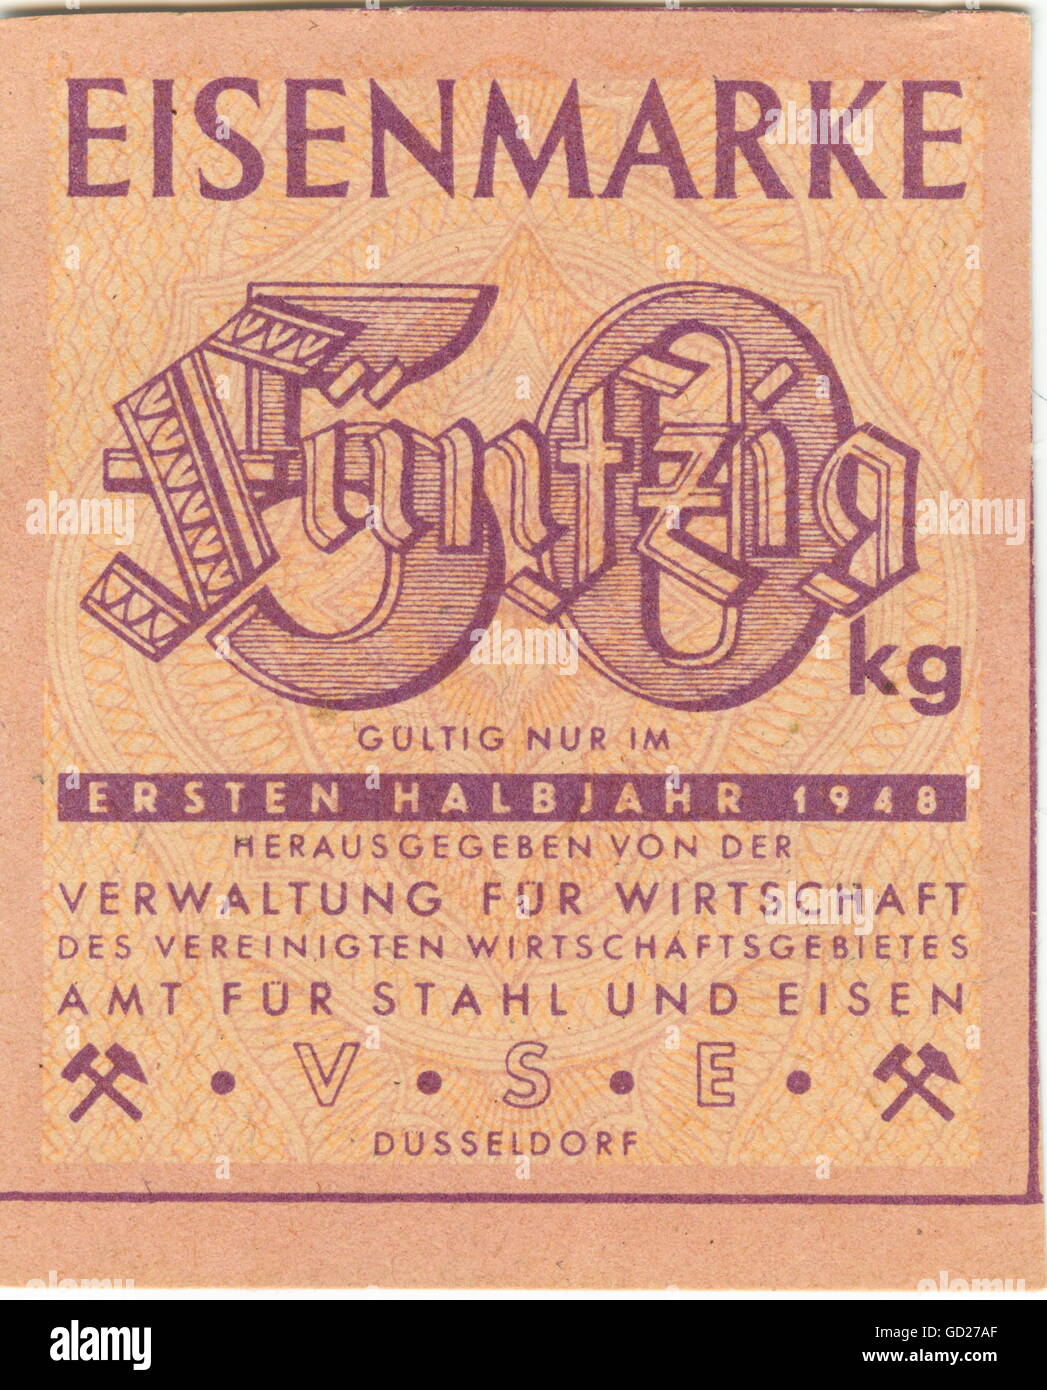 postwar era, economy, time of the occupation regime, ration card for iron for 50 kilogramme, valid in the first six months of 1948, issued by the administrative authority of economy, department for steel and iron, Germany, ration cards, rationing, industry, production, history, in the forties of the twentieth century, historic, historical, clipping, cut out, cut-out, cut-outs, 20th century, 1940s, Additional-Rights-Clearences-Not Available Stock Photo